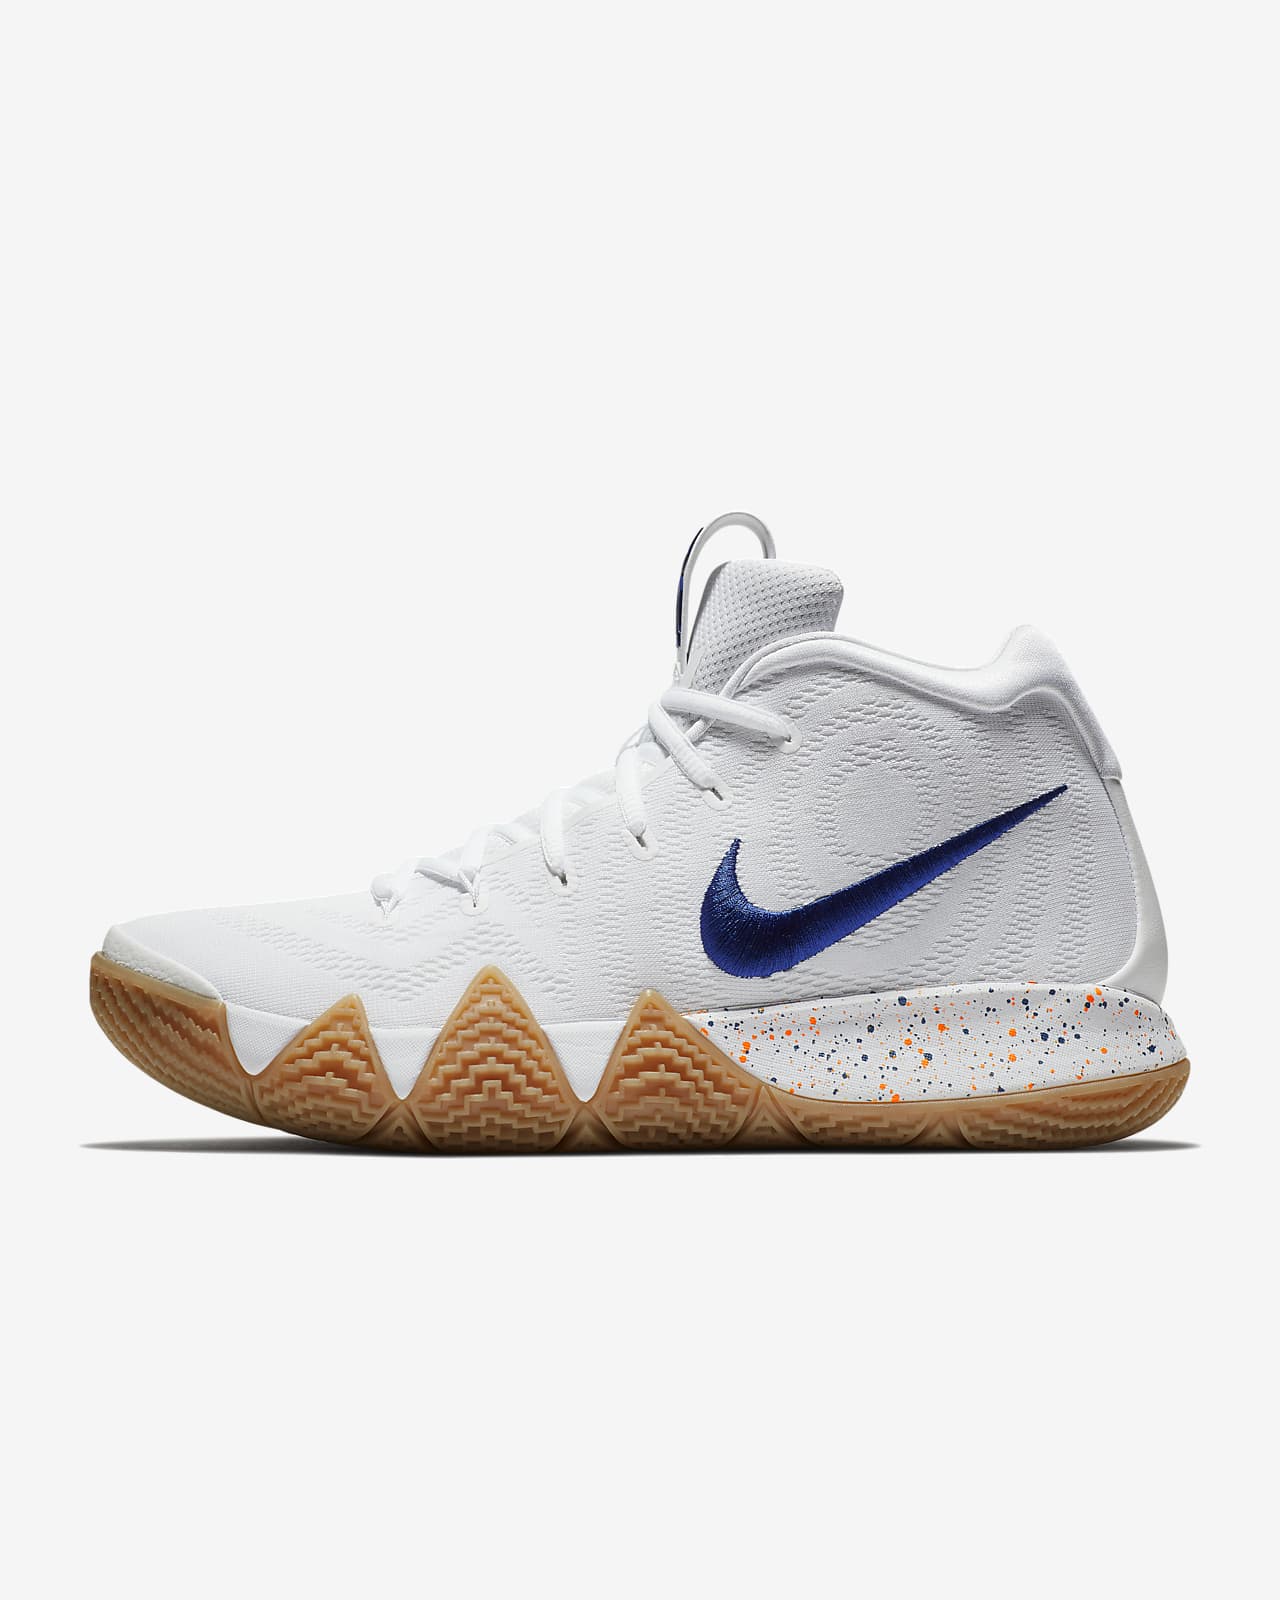 Kyrie 4 'Uncle Drew' Basketball Shoe 